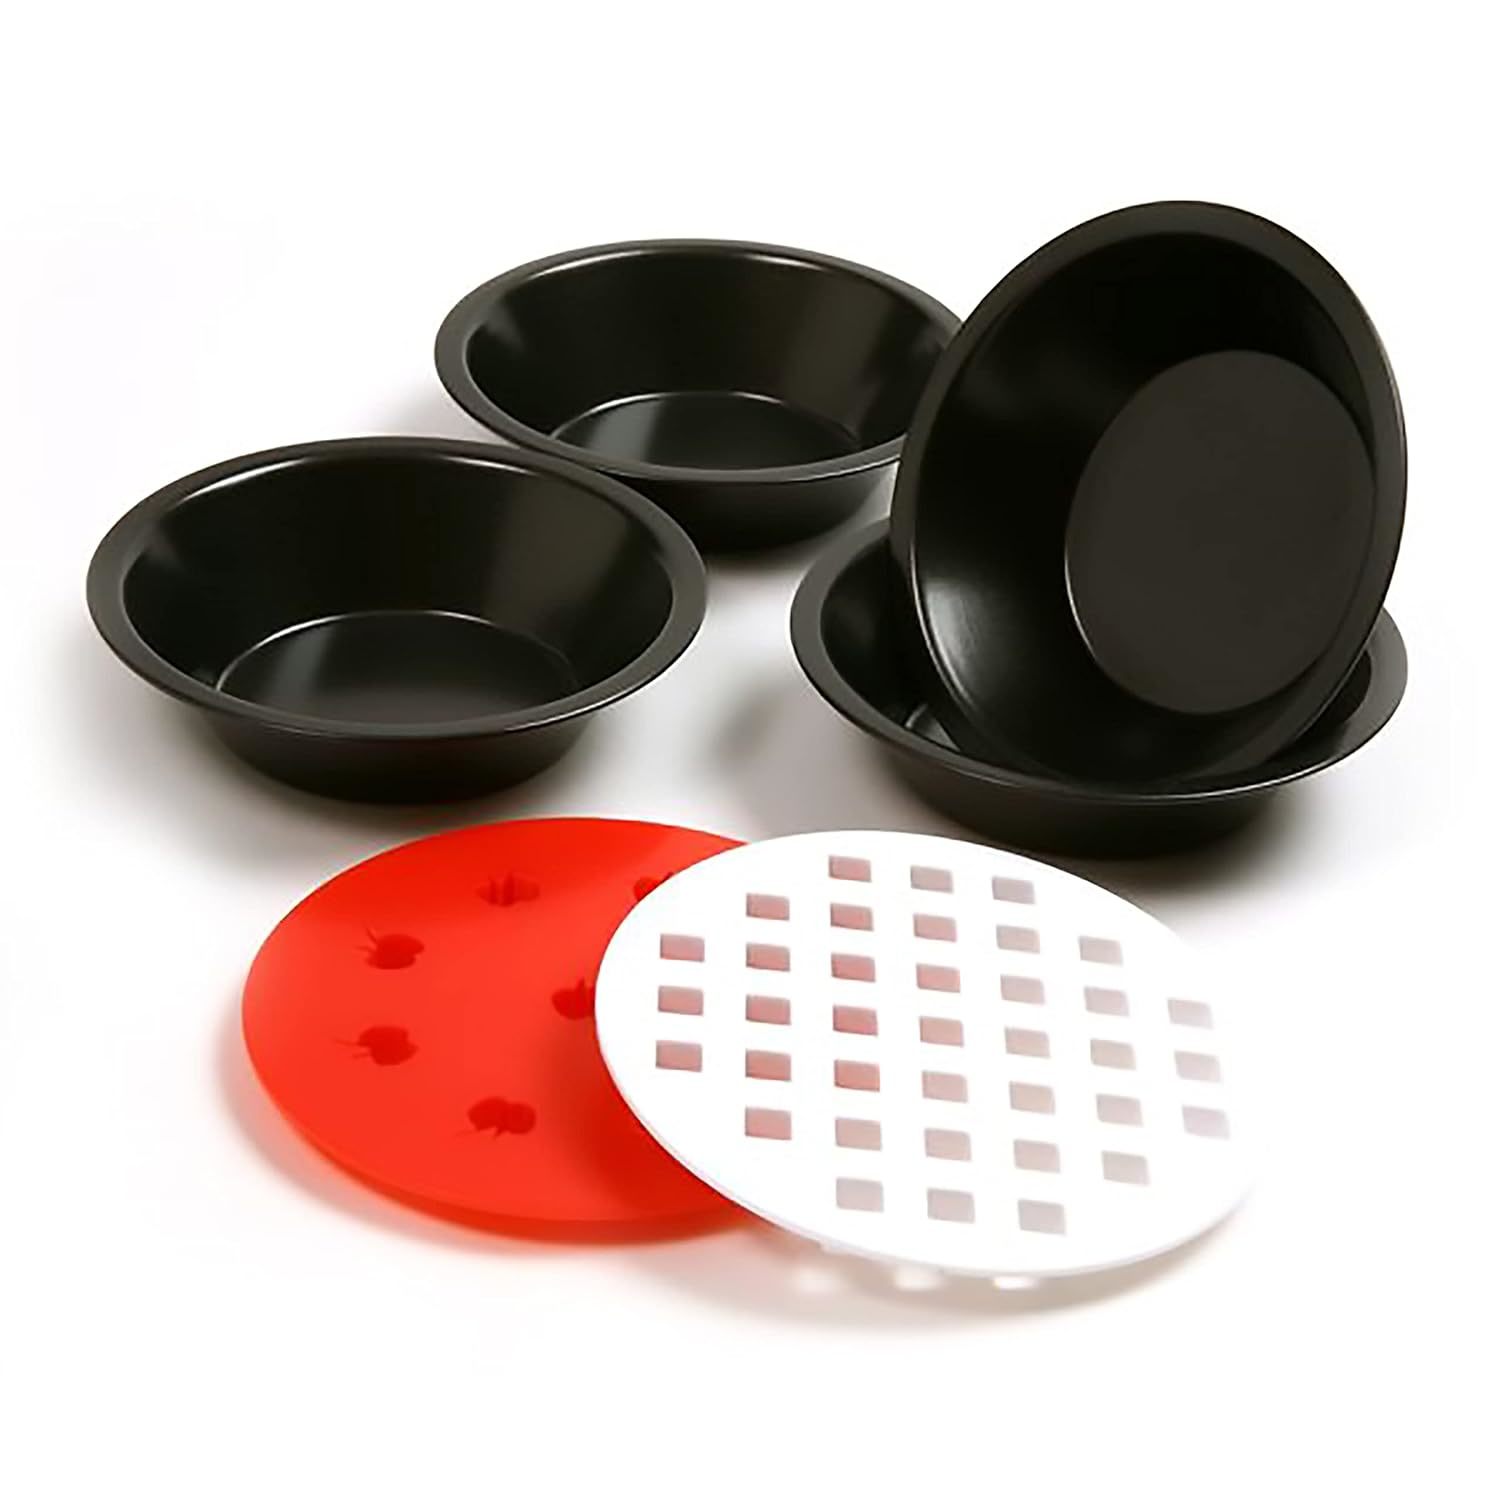 Primary image for Norpro Mini Non Stick Pie Pan Set Of 4 with Pie Top Cutters Set Of 2 Durable